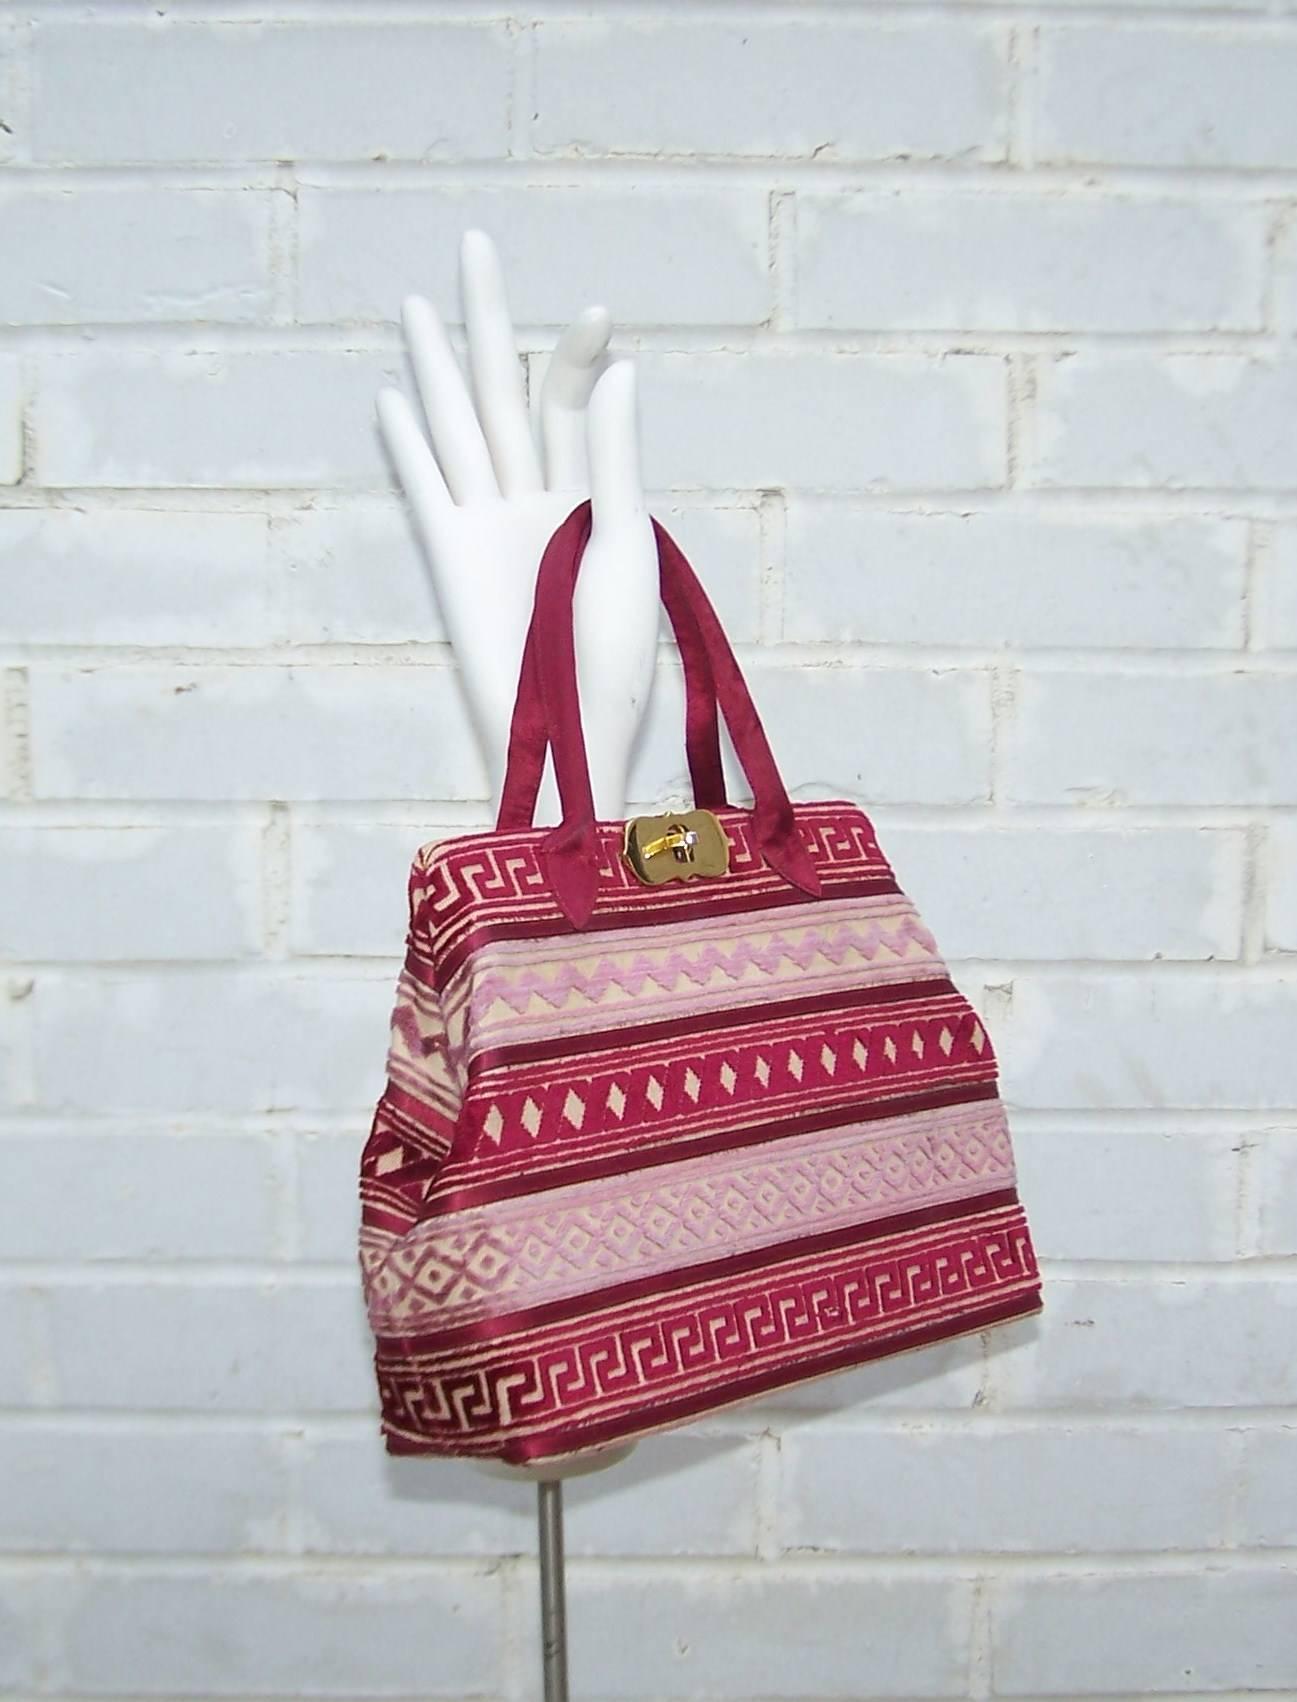 We are big fans of Roberta Di Camerino handbag designs...each one is like a precious tactile treasure.  This 1950's design for Lord & Taylor has a petite carpetbag sensibility in a wonderful graphically printed ruby red cut velvet.  The turn lock